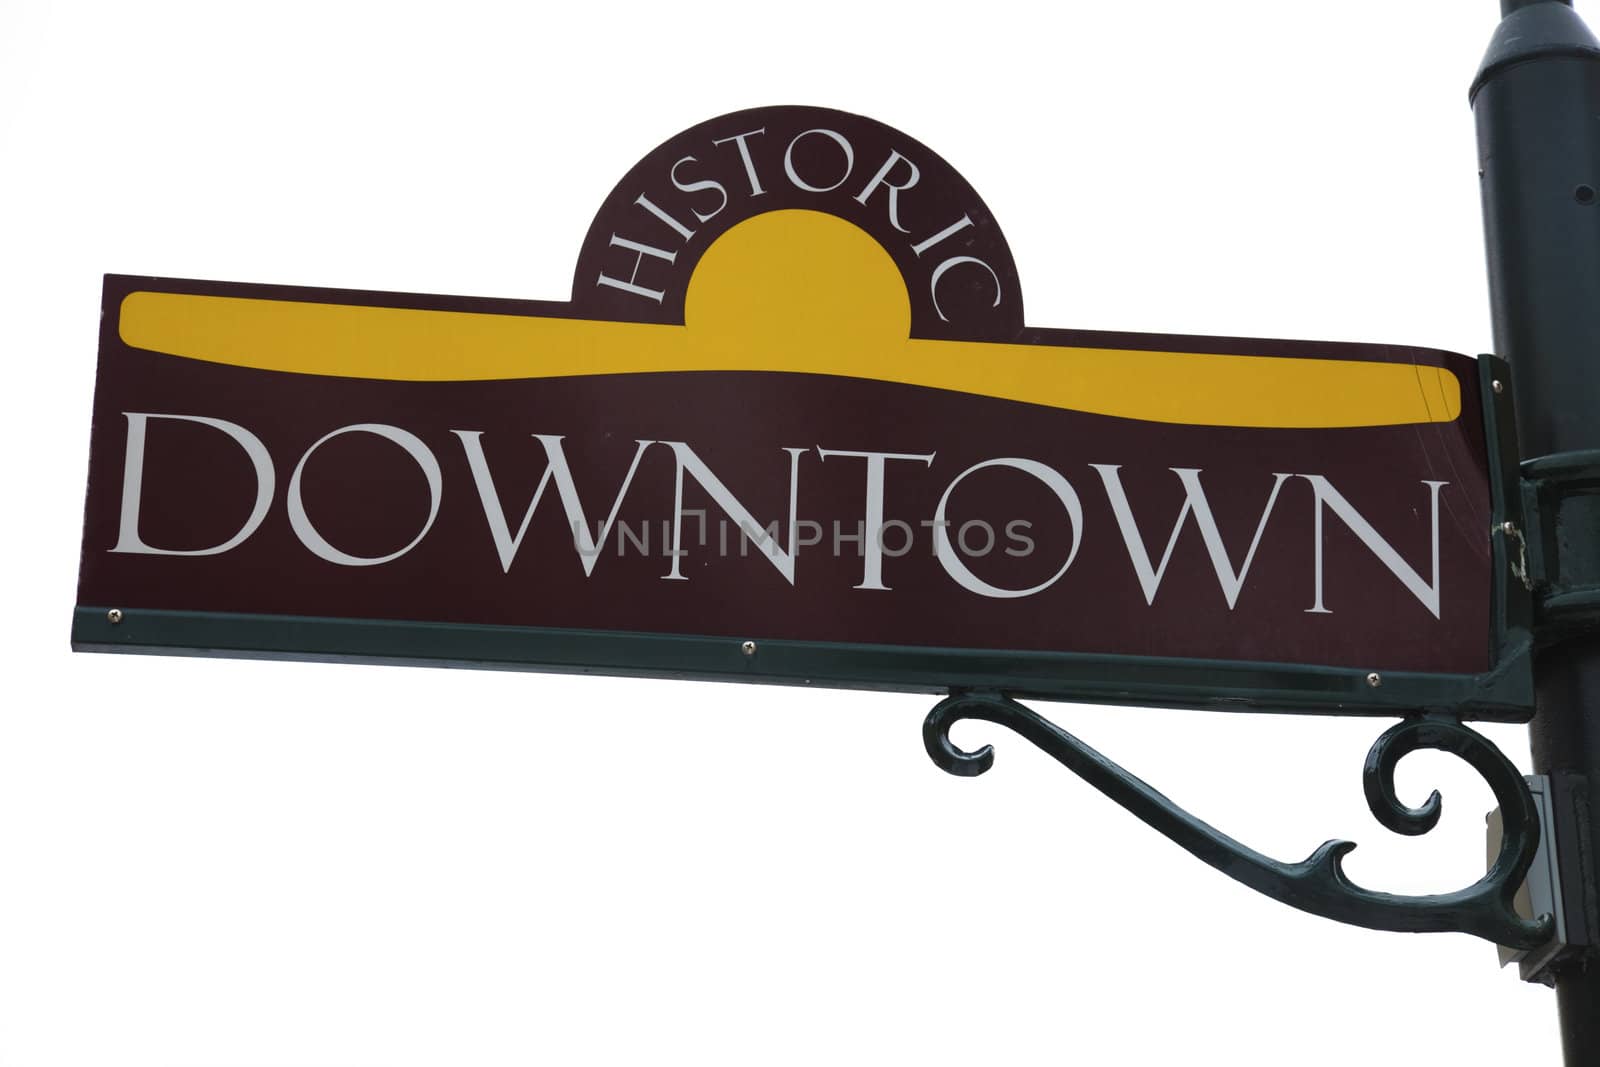 Historic downtown sign on white.